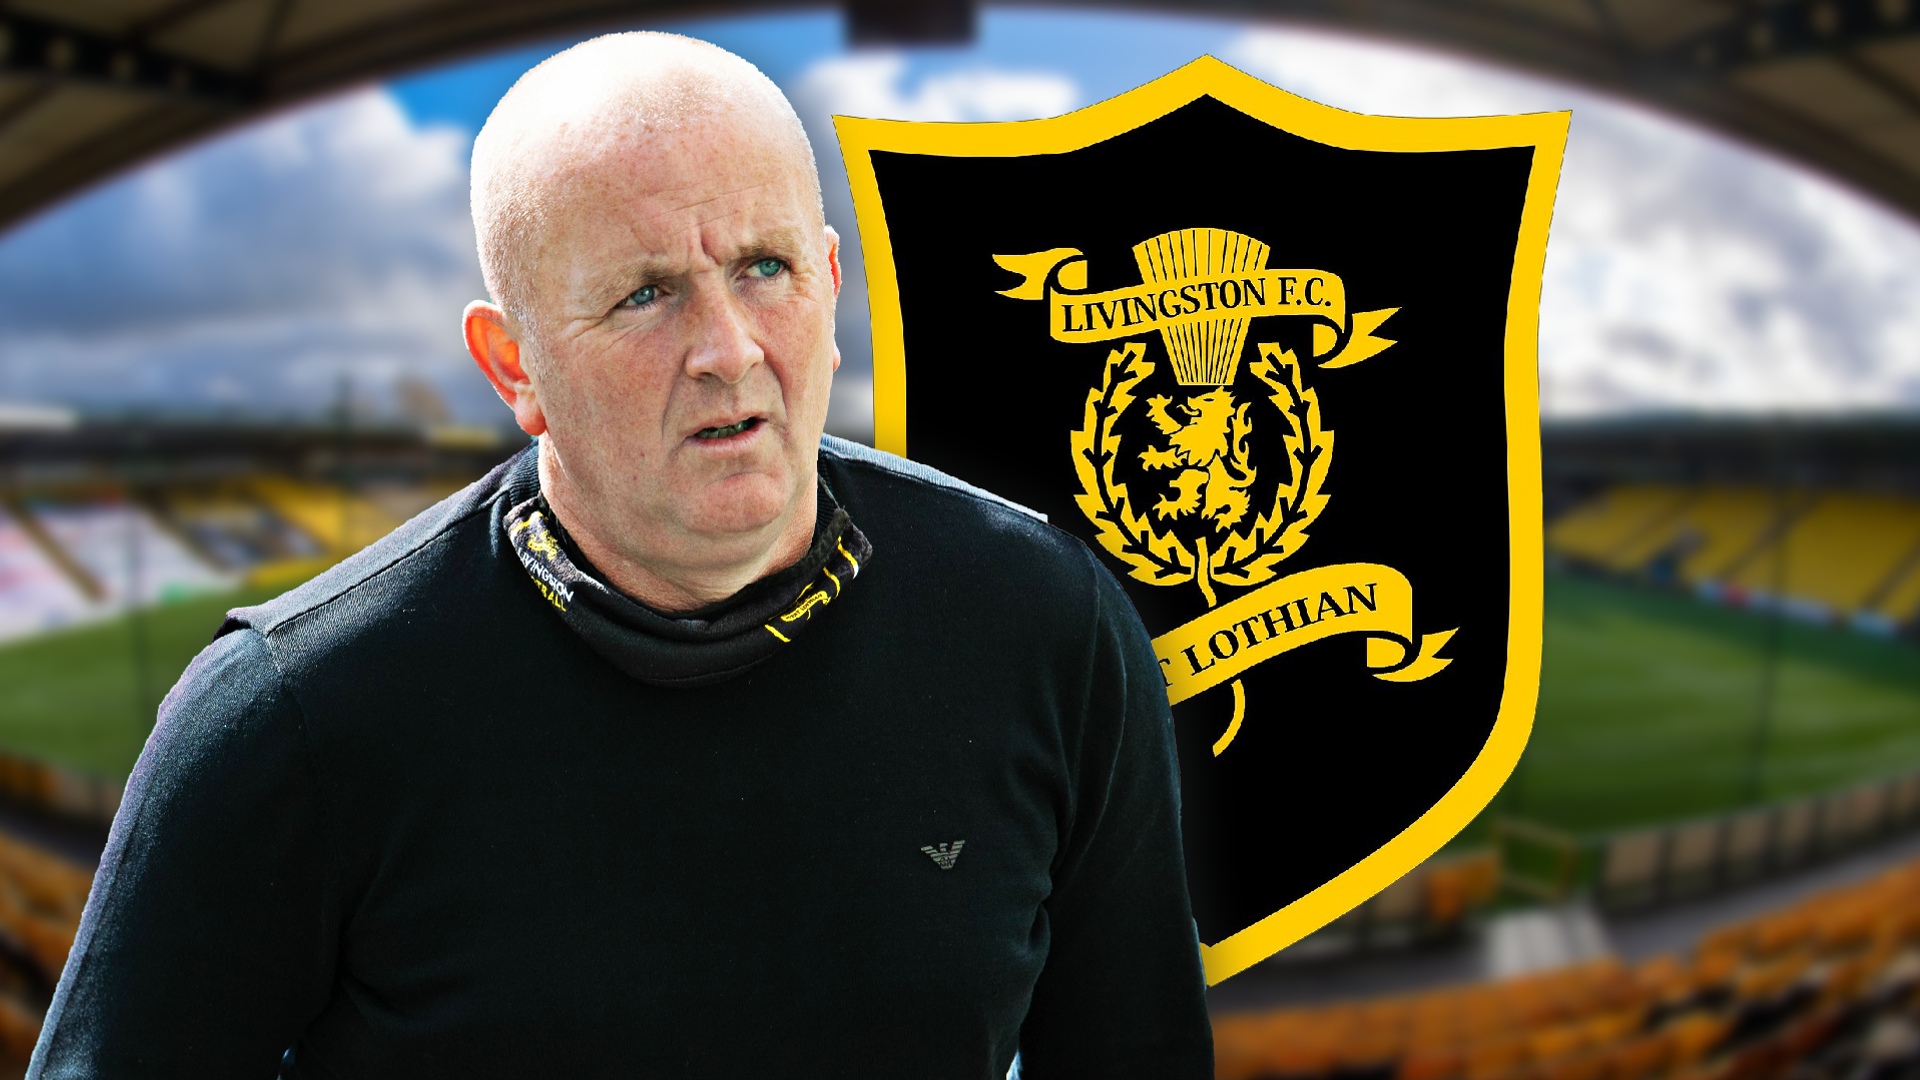 Livingston fixtures: Rangers on opening day live on Sky 